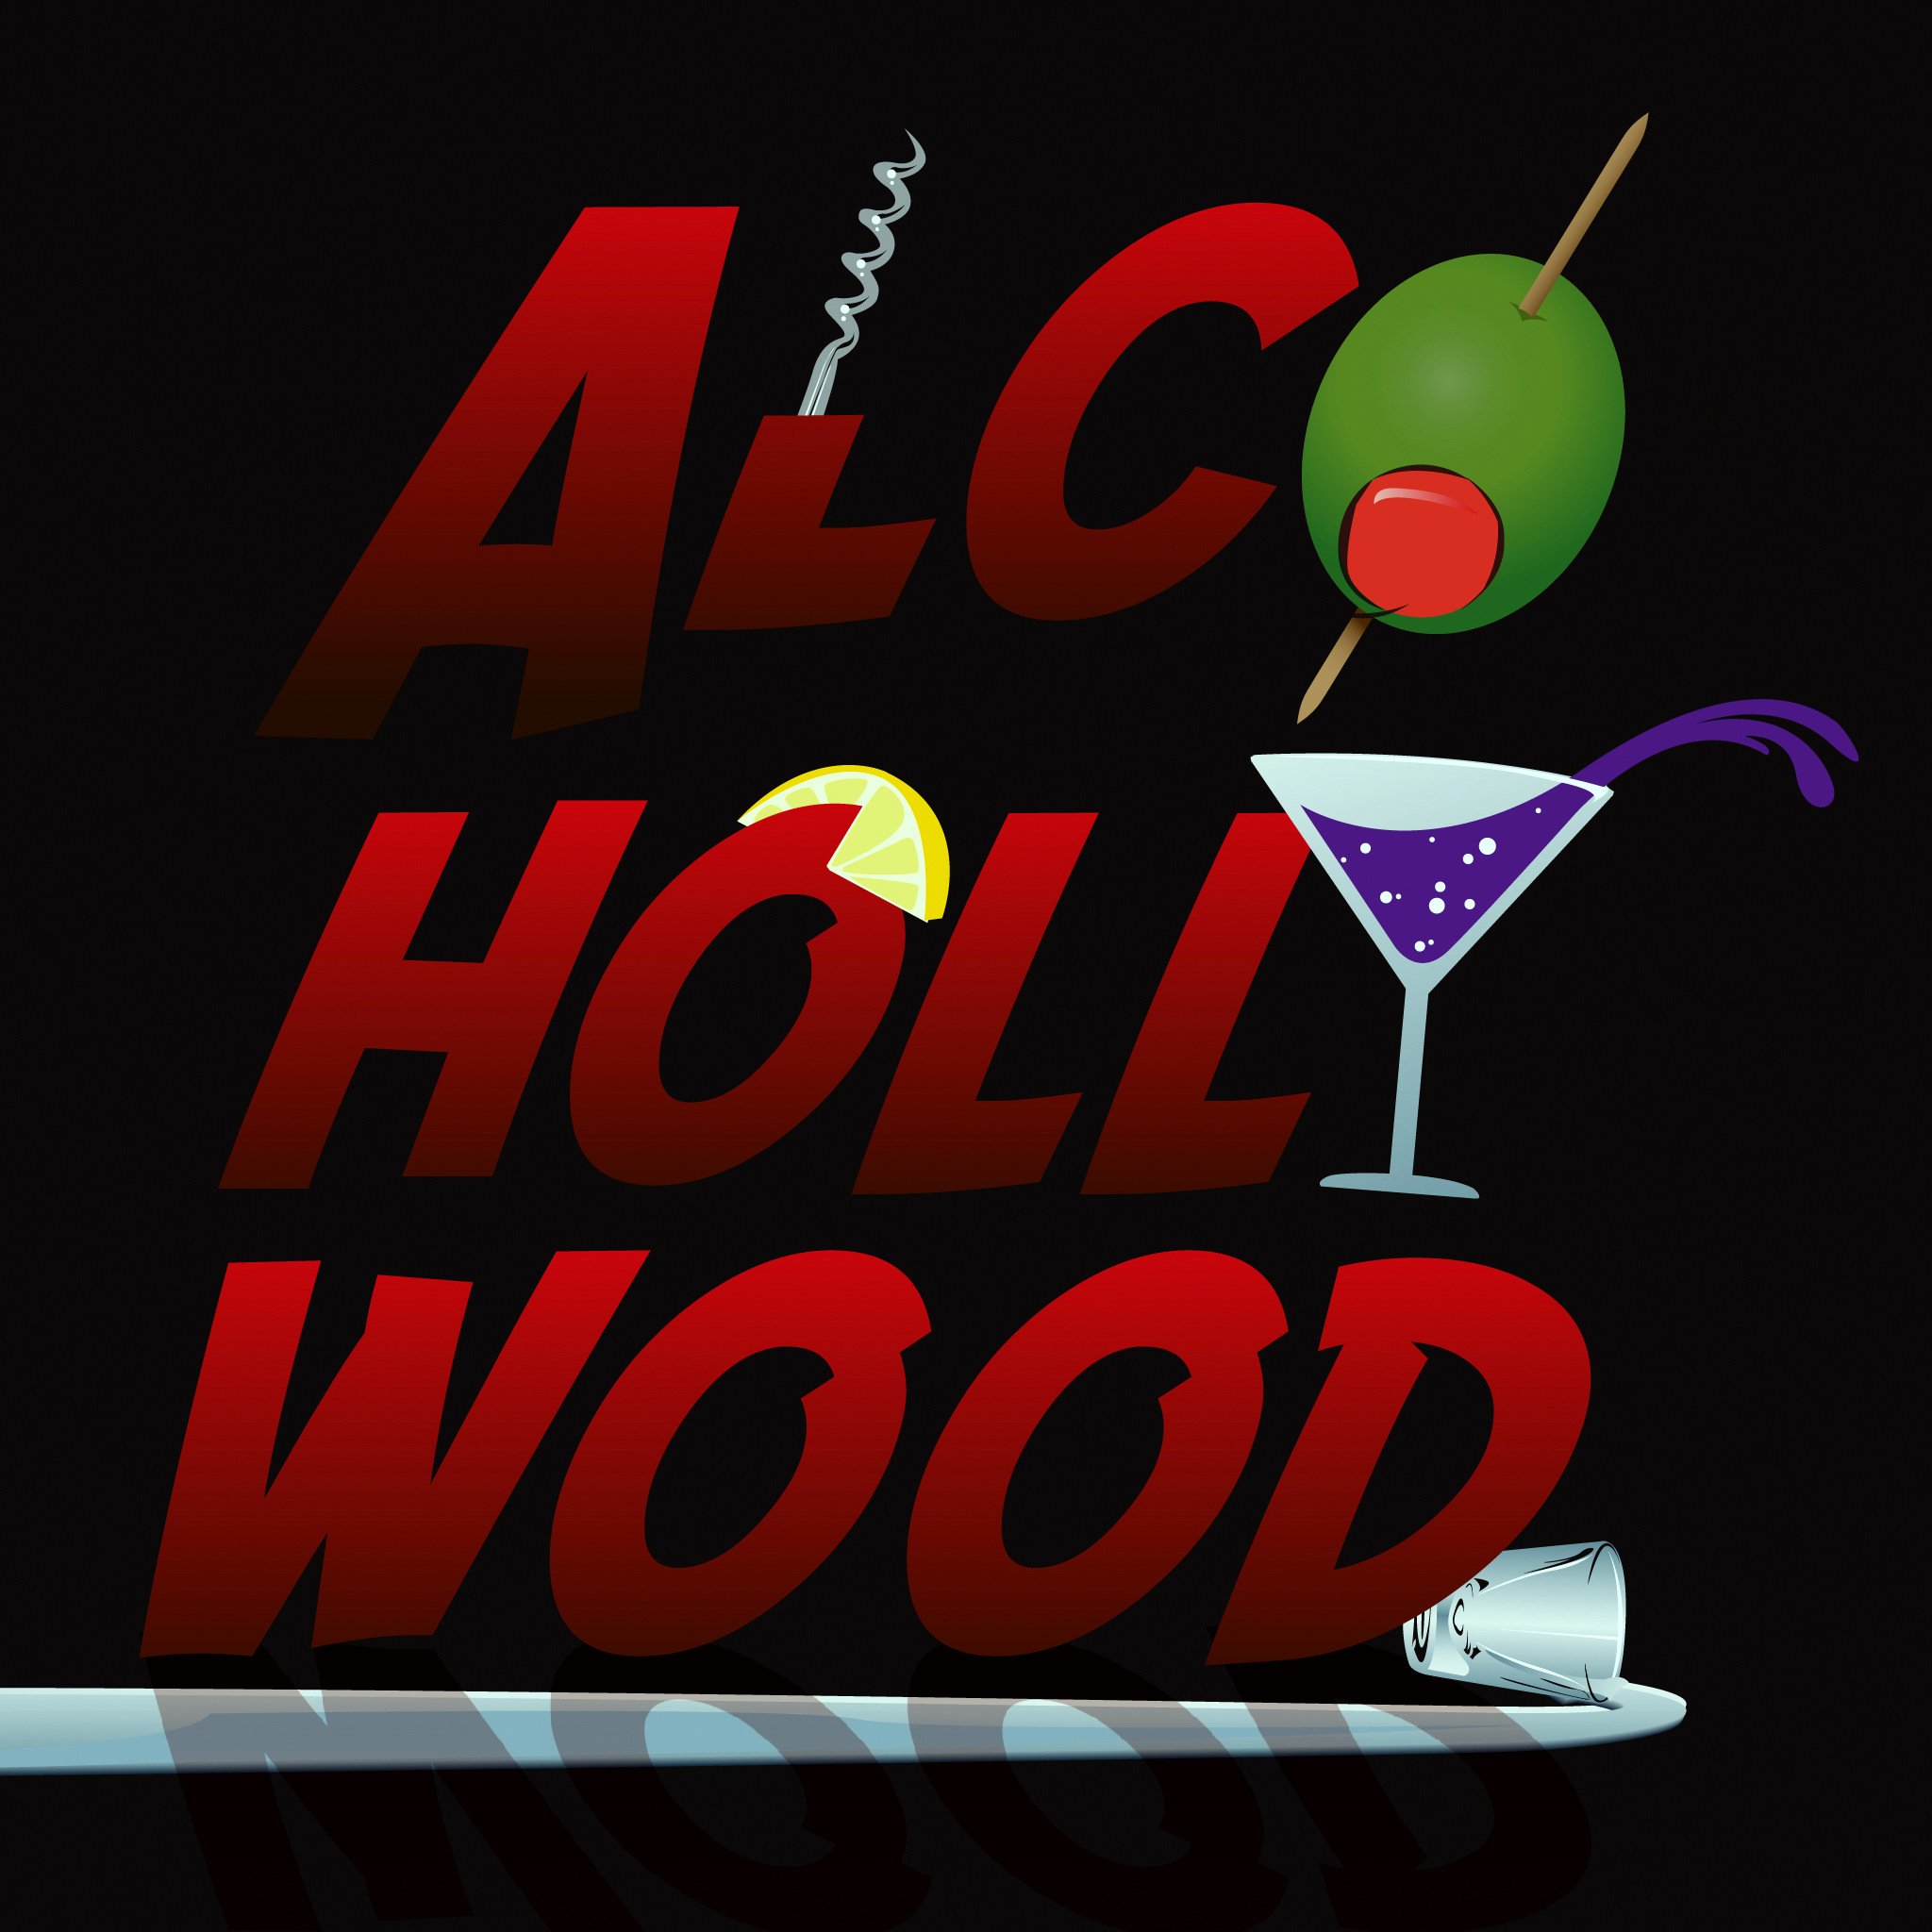 Your source for cinebriation! Reviews, interviews, and the home of the Alcohollywood podcast. Editor: @alcohollywood. @CriticsChicago